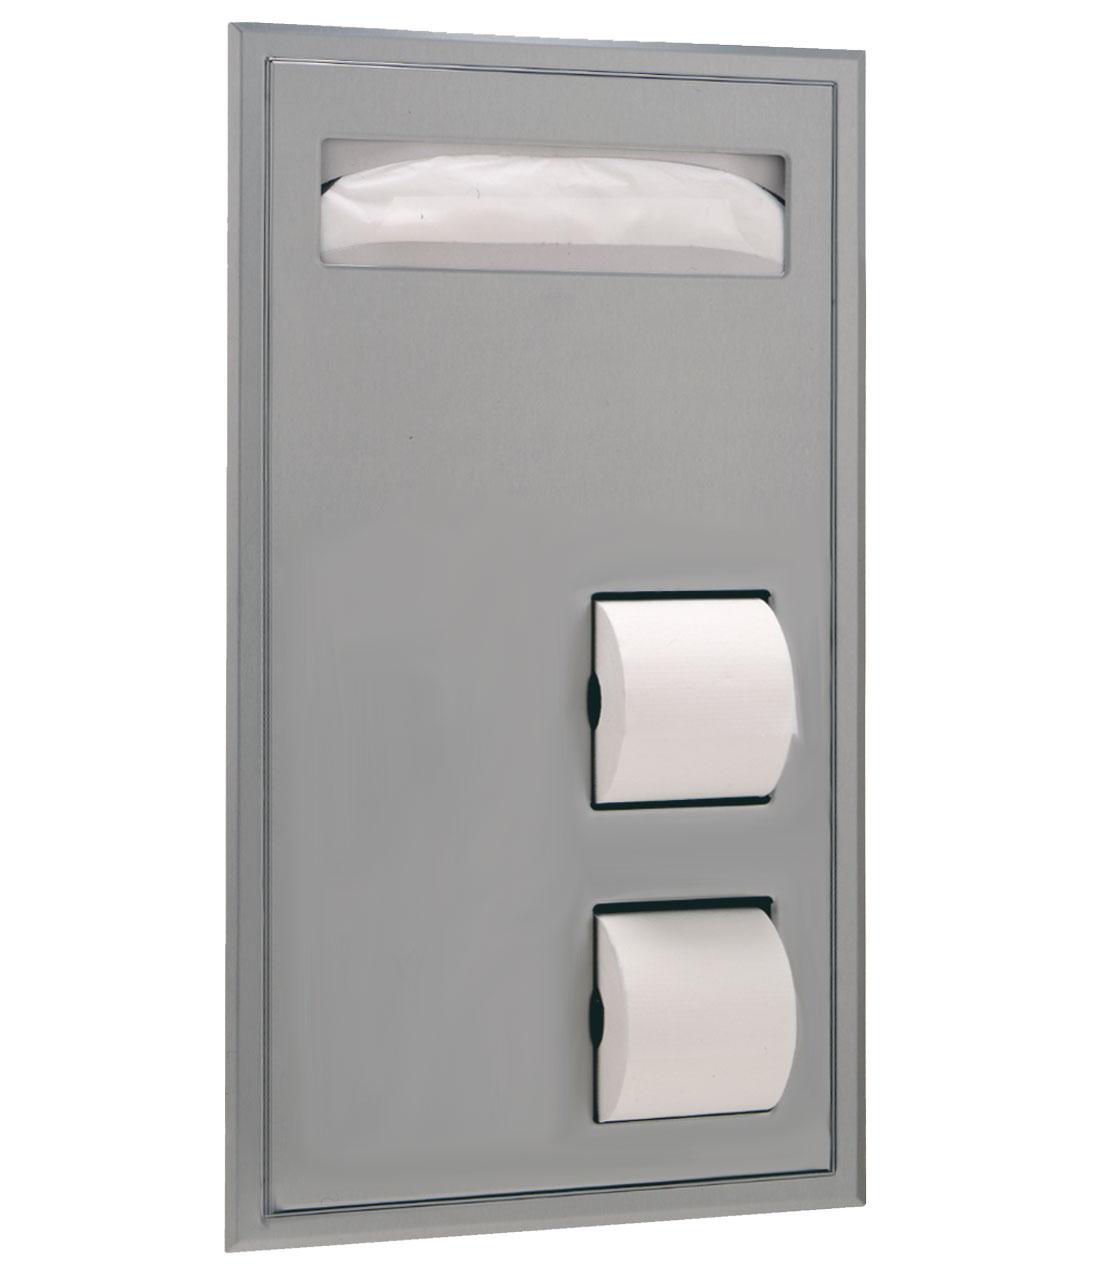 Partition-Mounted Seat-Cover Dispenser and Toilet Tissue Dispenser Image